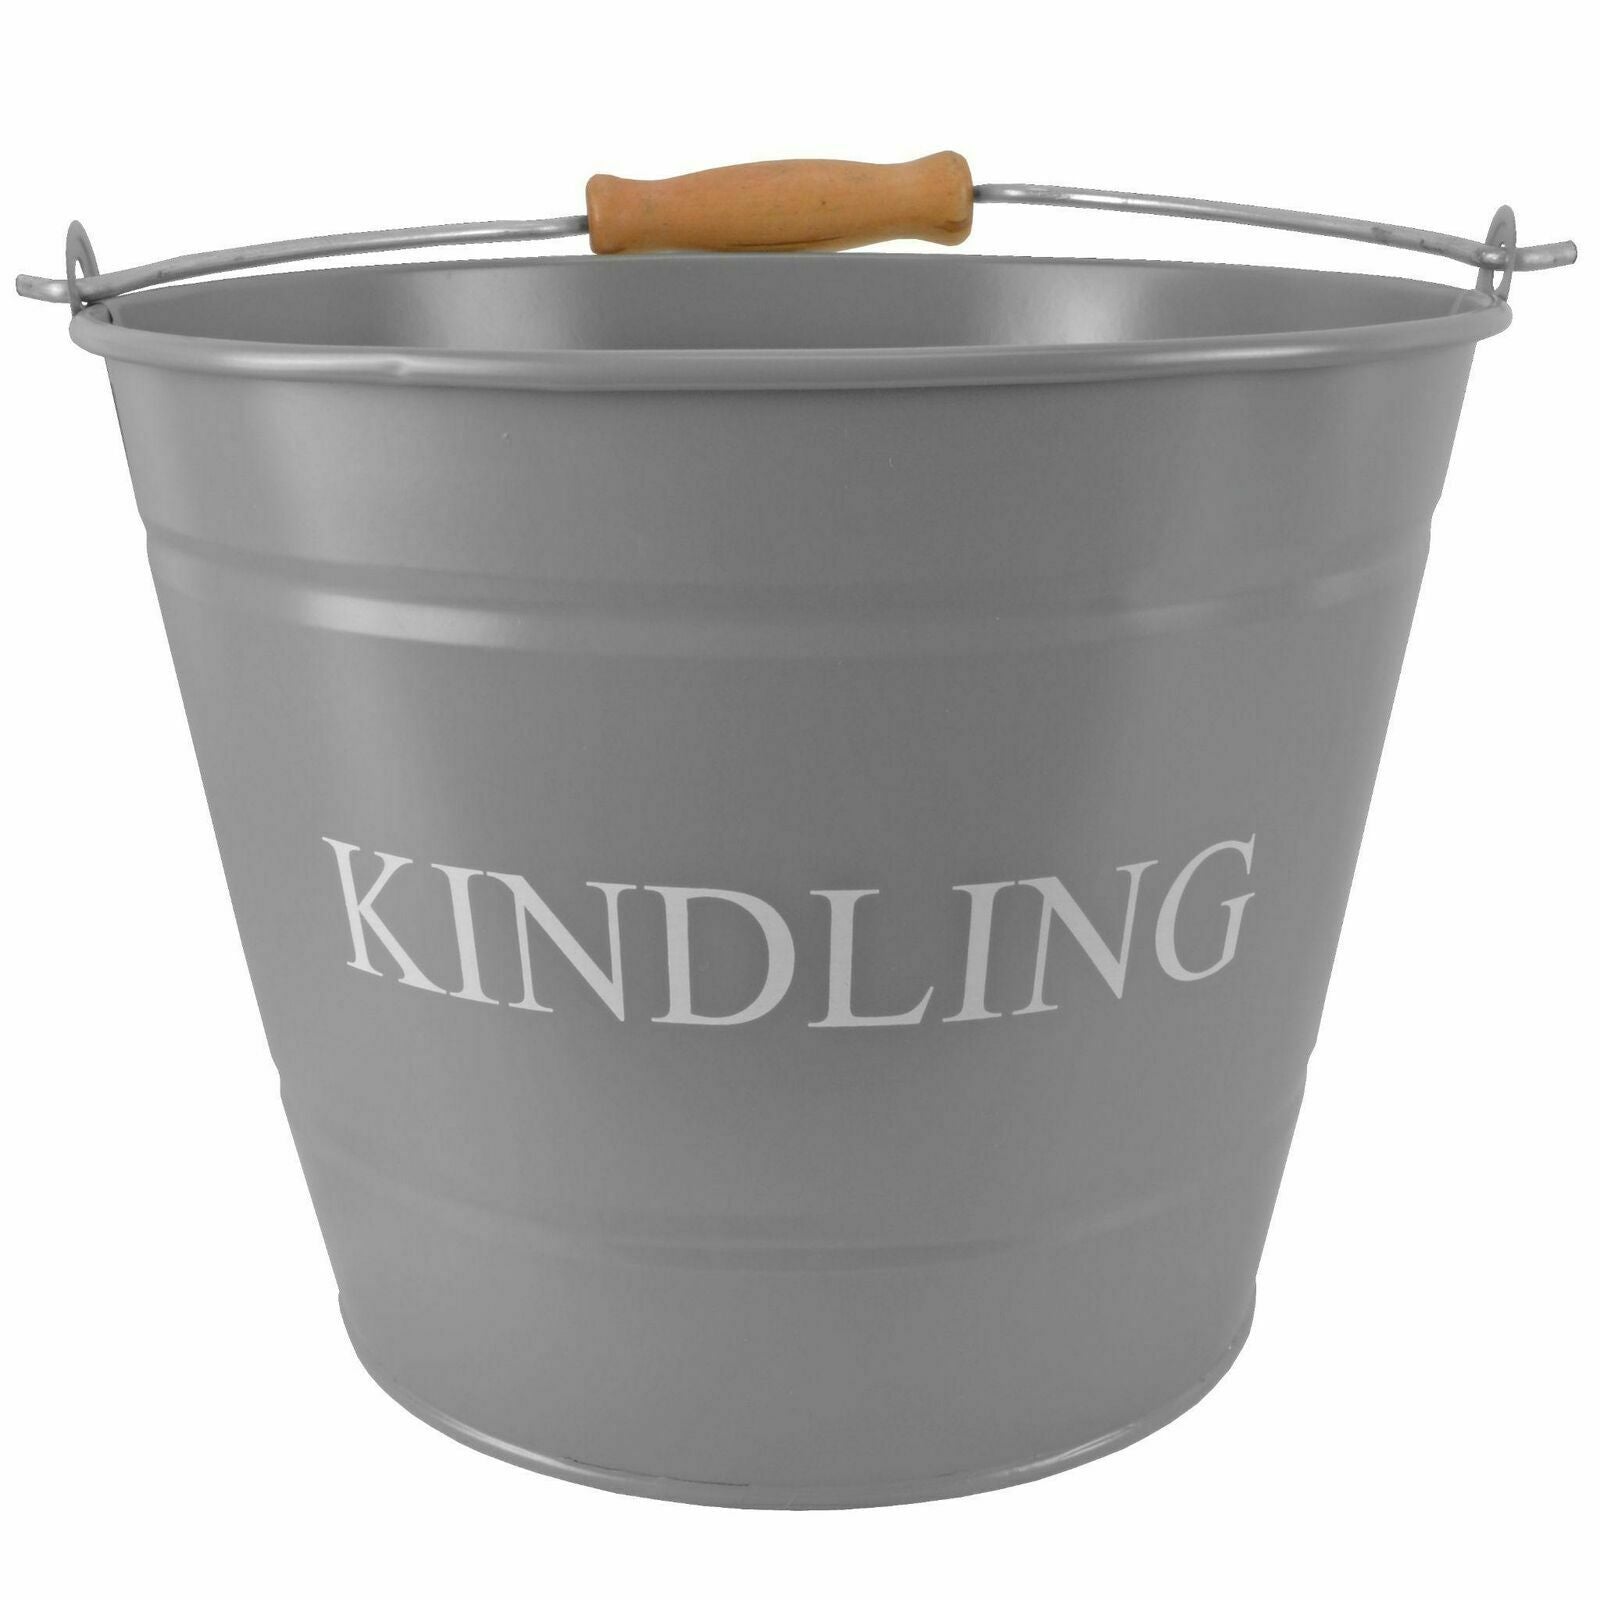 Manor-Small-Kindling-Bucket-with-Wooden-Handle-23cm-Grey-Finish